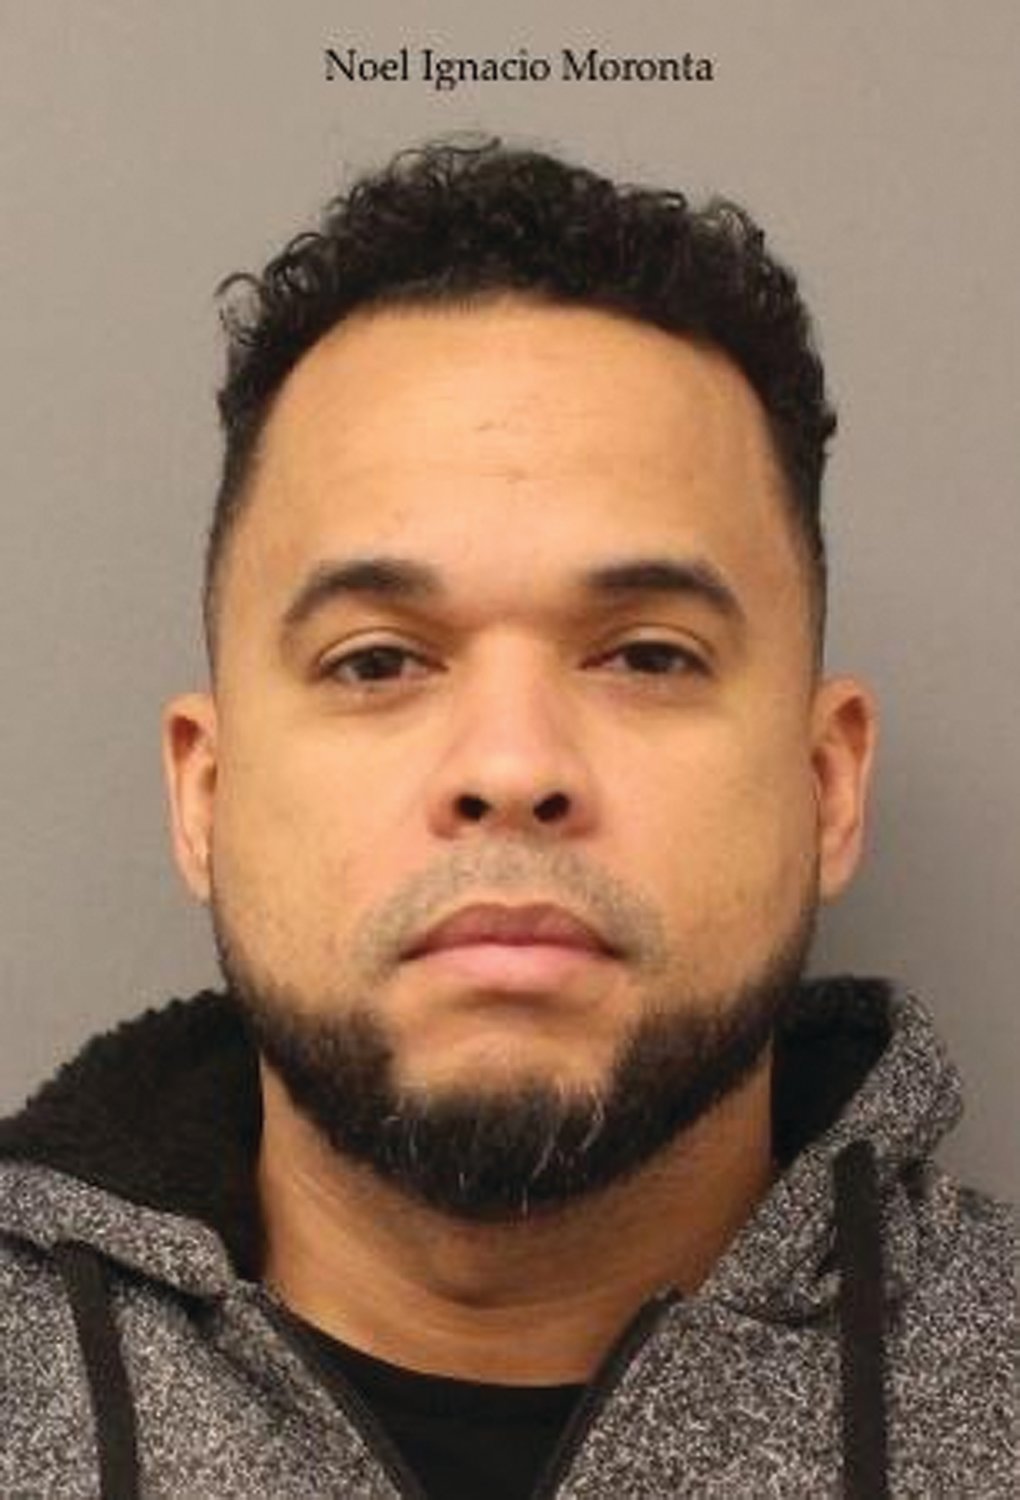 ARRESTED: The RISP HIDTA Task Force took three suspects into custody and charged them with drug crimes and failing to report a death: Noel Ignacio Moronta,  41, of 113 Sisson St., Providence; Nelson A. Reyes, 38, of 716 Central Ave., Johnston; and Marien Solano, 36, of 113 Sisson St., Providence. (Photos courtesy Rhode Island State Police)